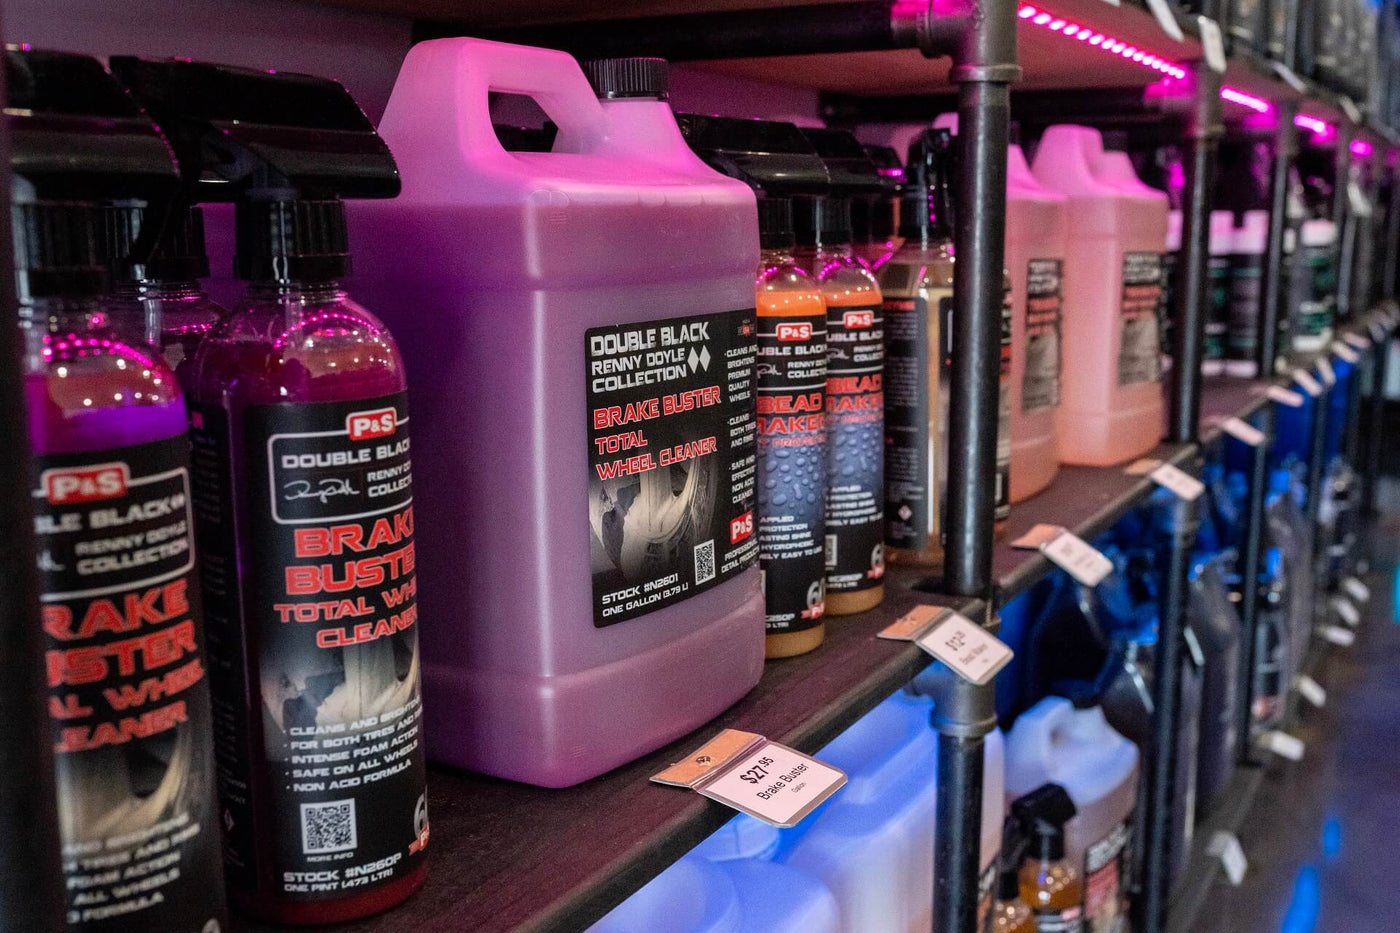 Auto Detailing Supplies, Chemicals, Equipment, Accessories and more.